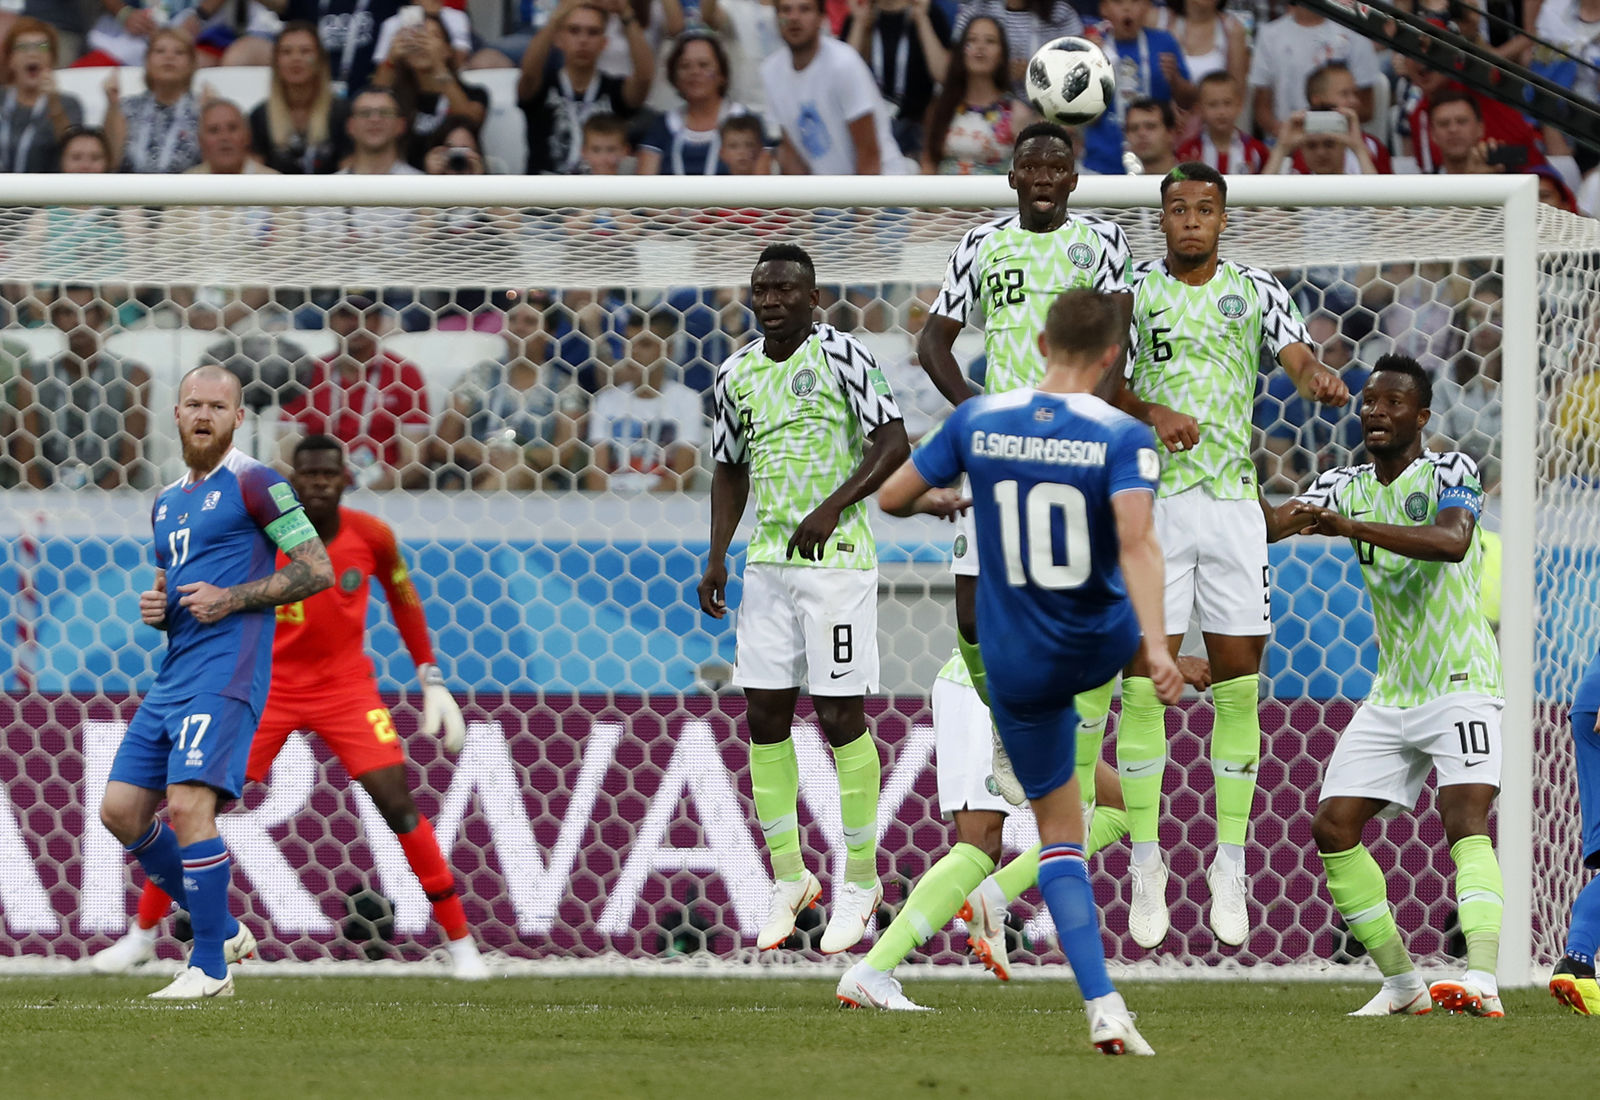 Iceland's Gylfi Sigurdsson takes a free kick during the group D match between Nigeria and Iceland at the 2018 soccer World Cup in the Volgograd Arena in Volgograd, Russia, Friday, June 22, 2018. (AP Photo/Darko Vojinovic)